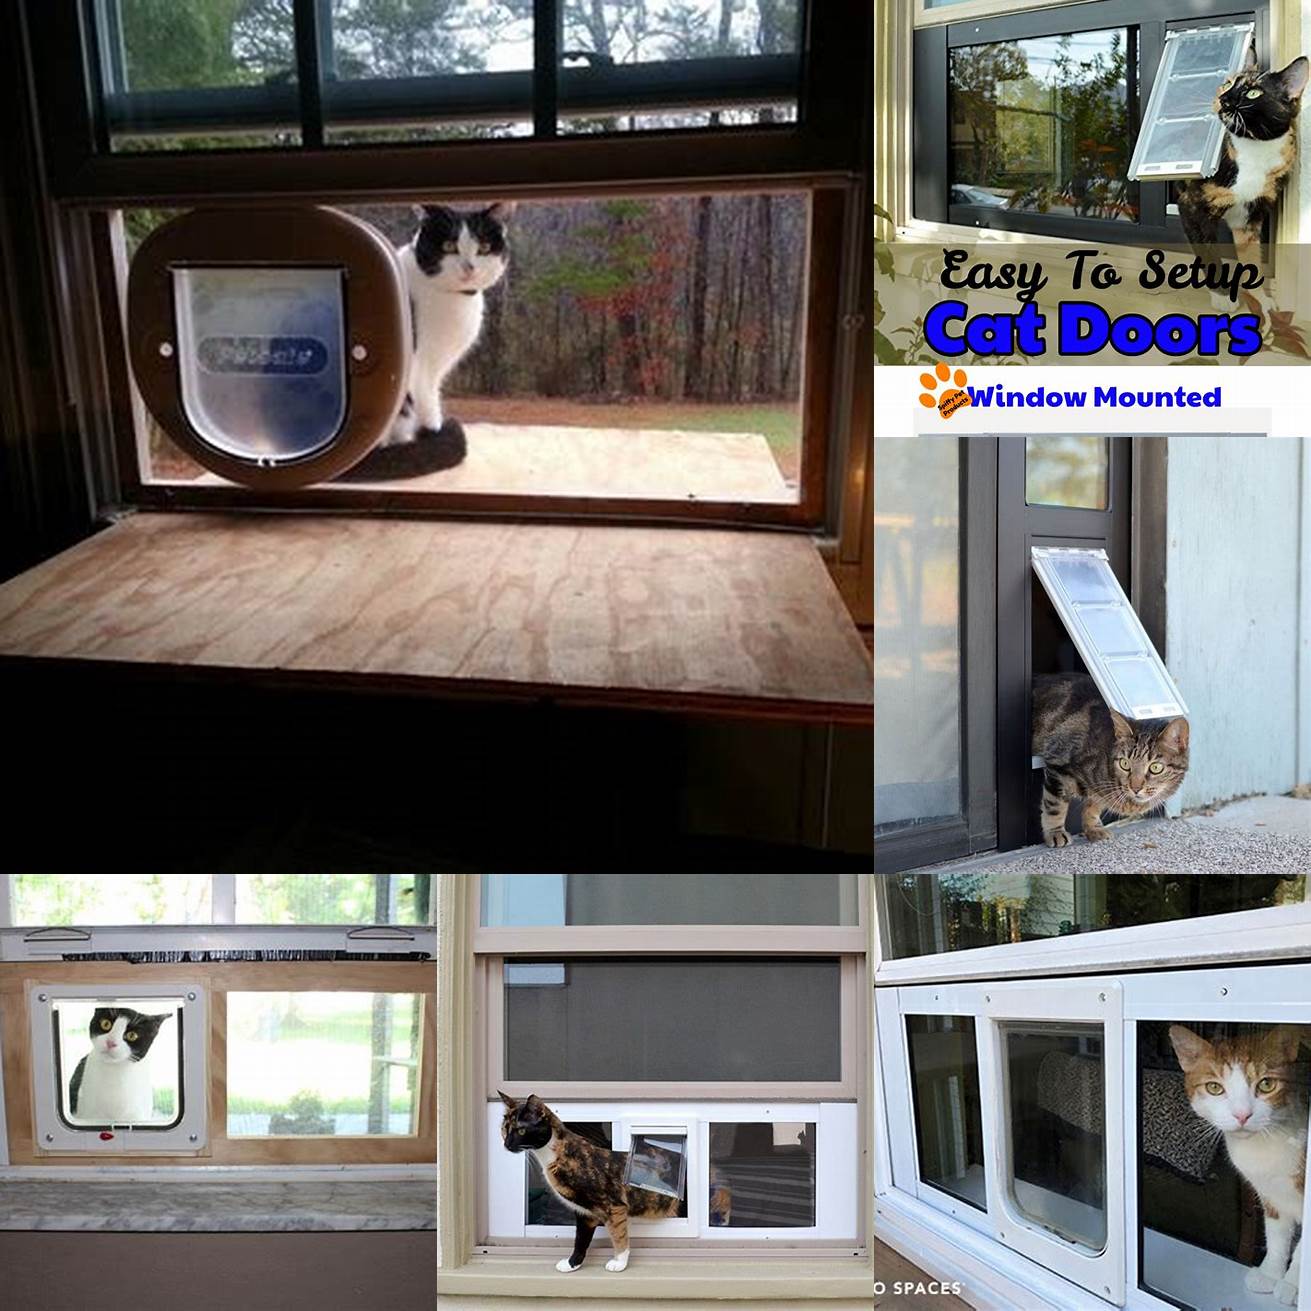 Q Can a cat door for sliding window be removed